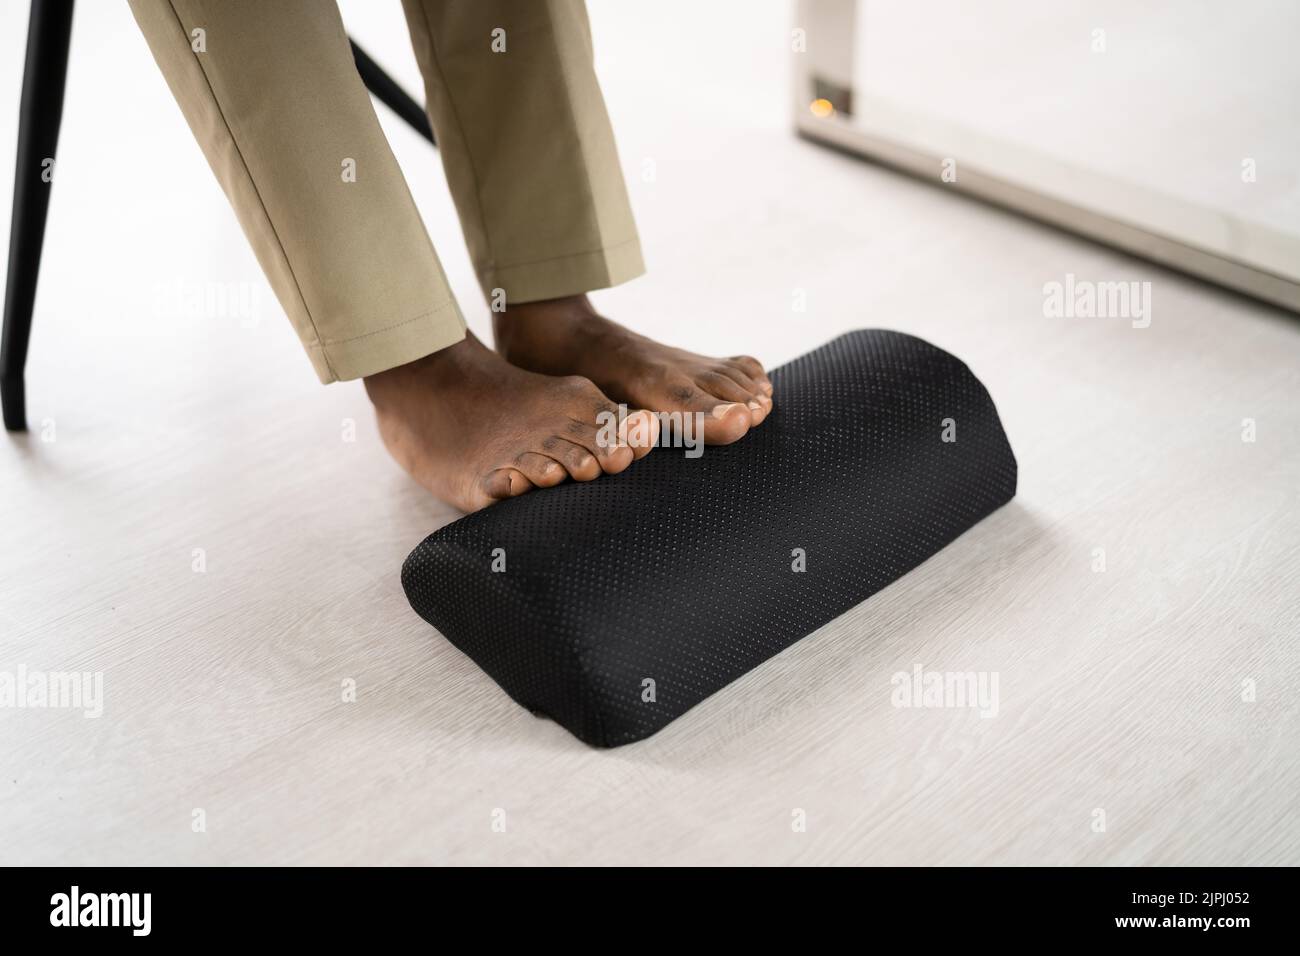 Footrest Against Pain In Office. Shifting Posture And Positions Stock Photo